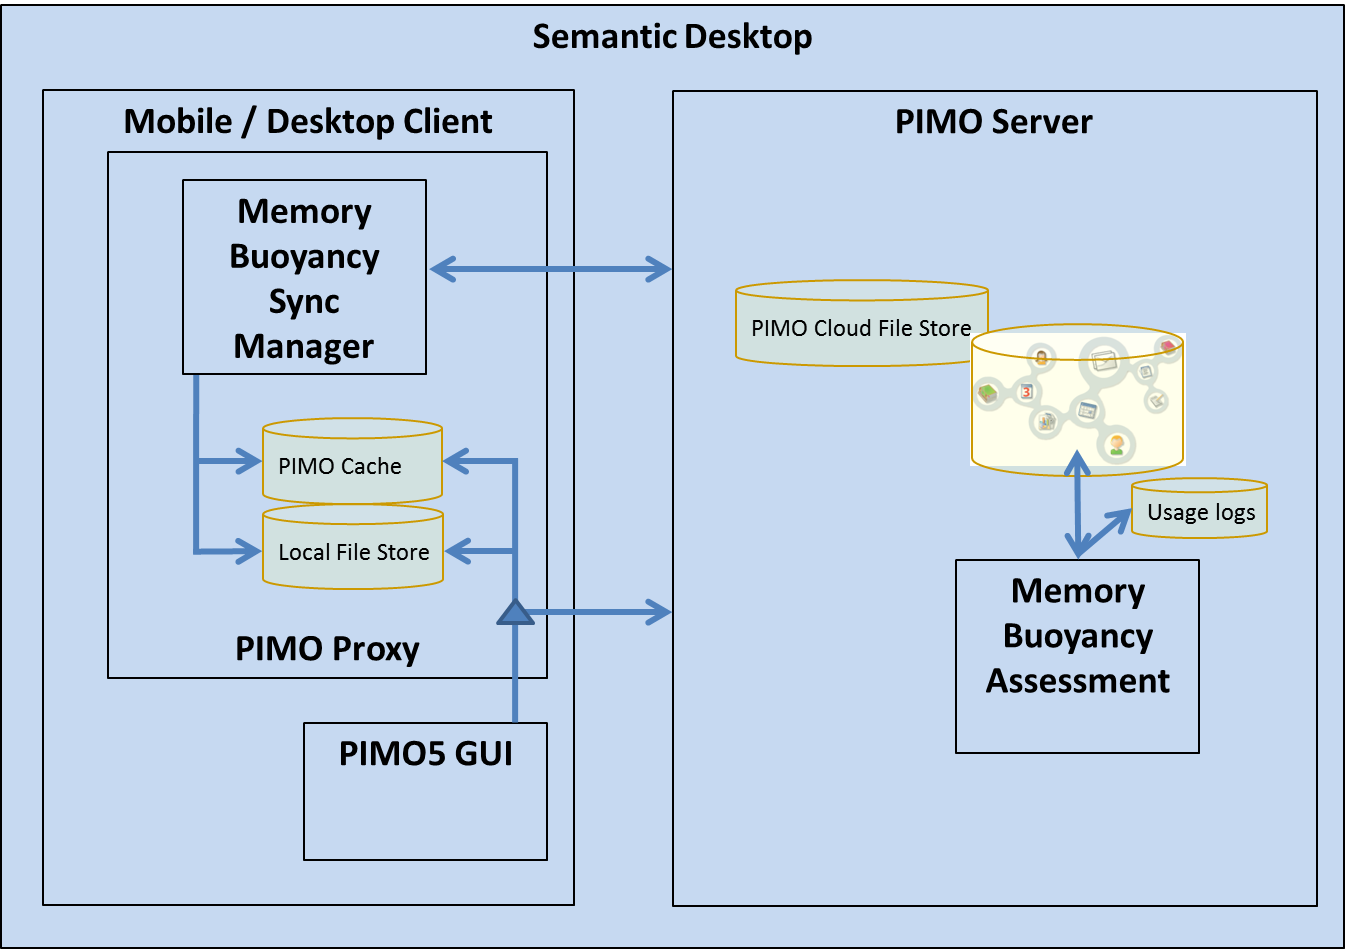 Architecture Memory Buoyancy Sync Manager in the Semantic Desktop